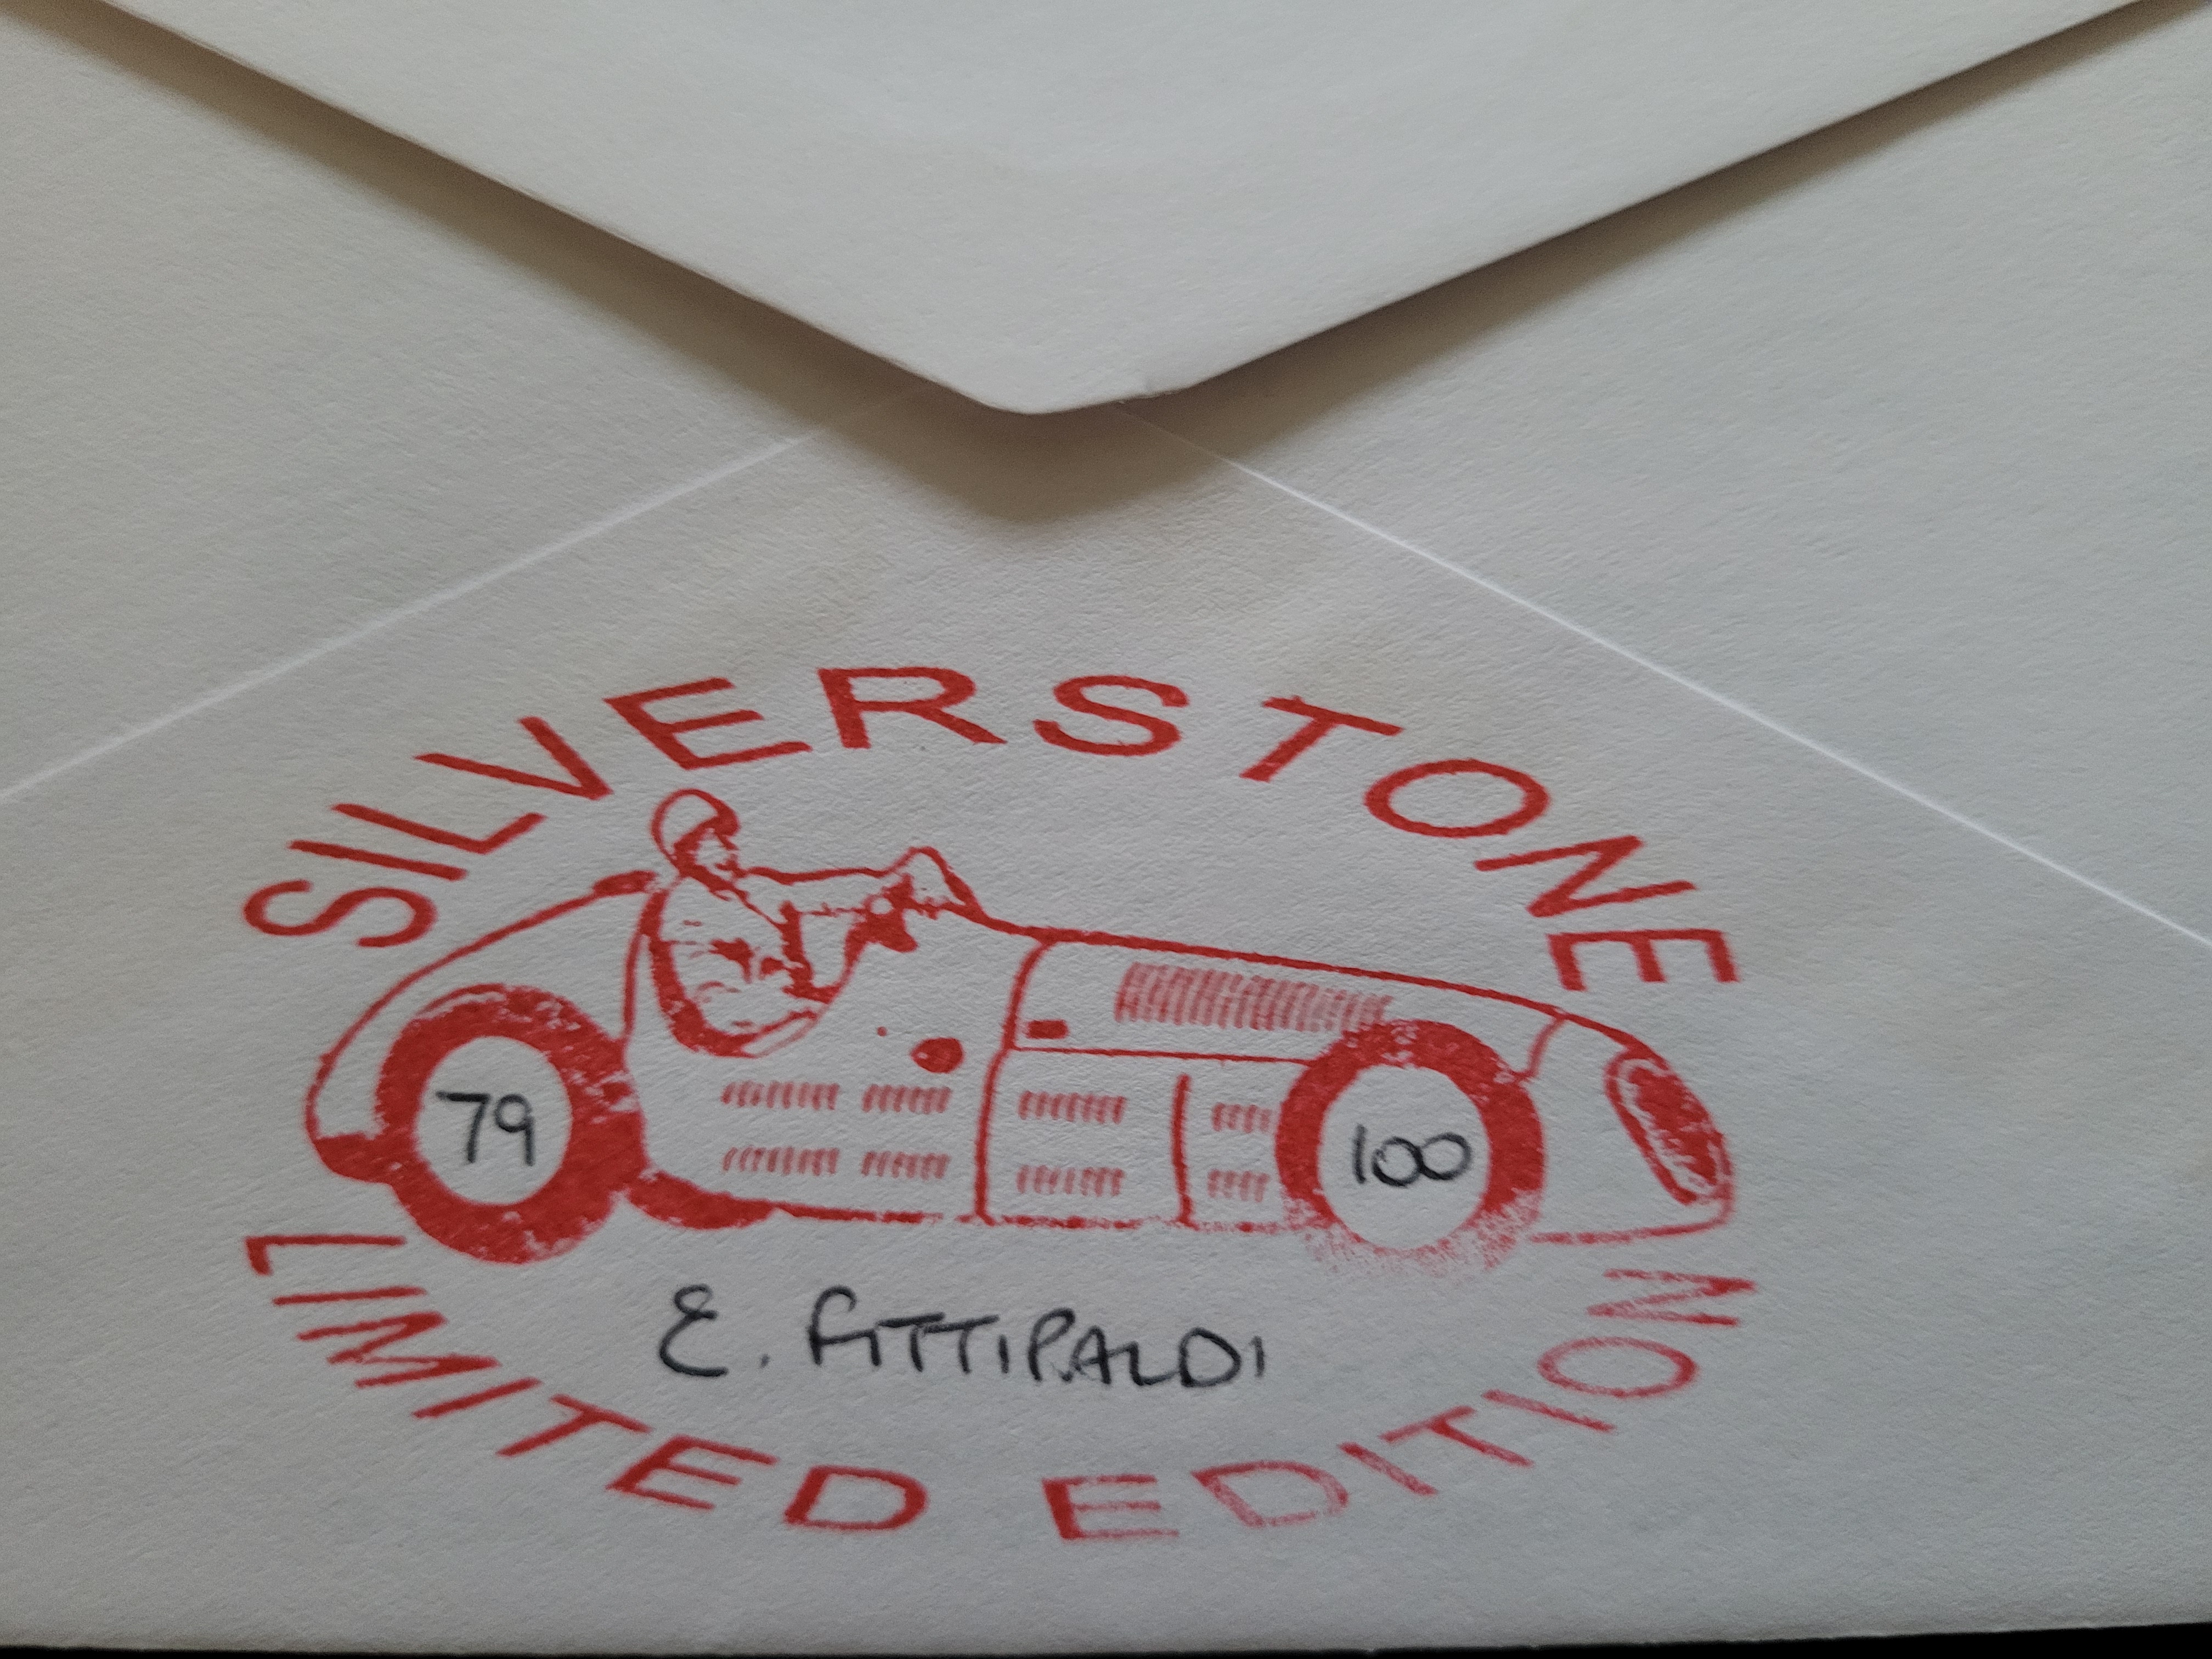 1998 SILVERSTONE MOTOR RACING LTD EDITION POSTAL COVER AUTOGRAPHED BY EMERSON FITTIPALDI - Image 2 of 2